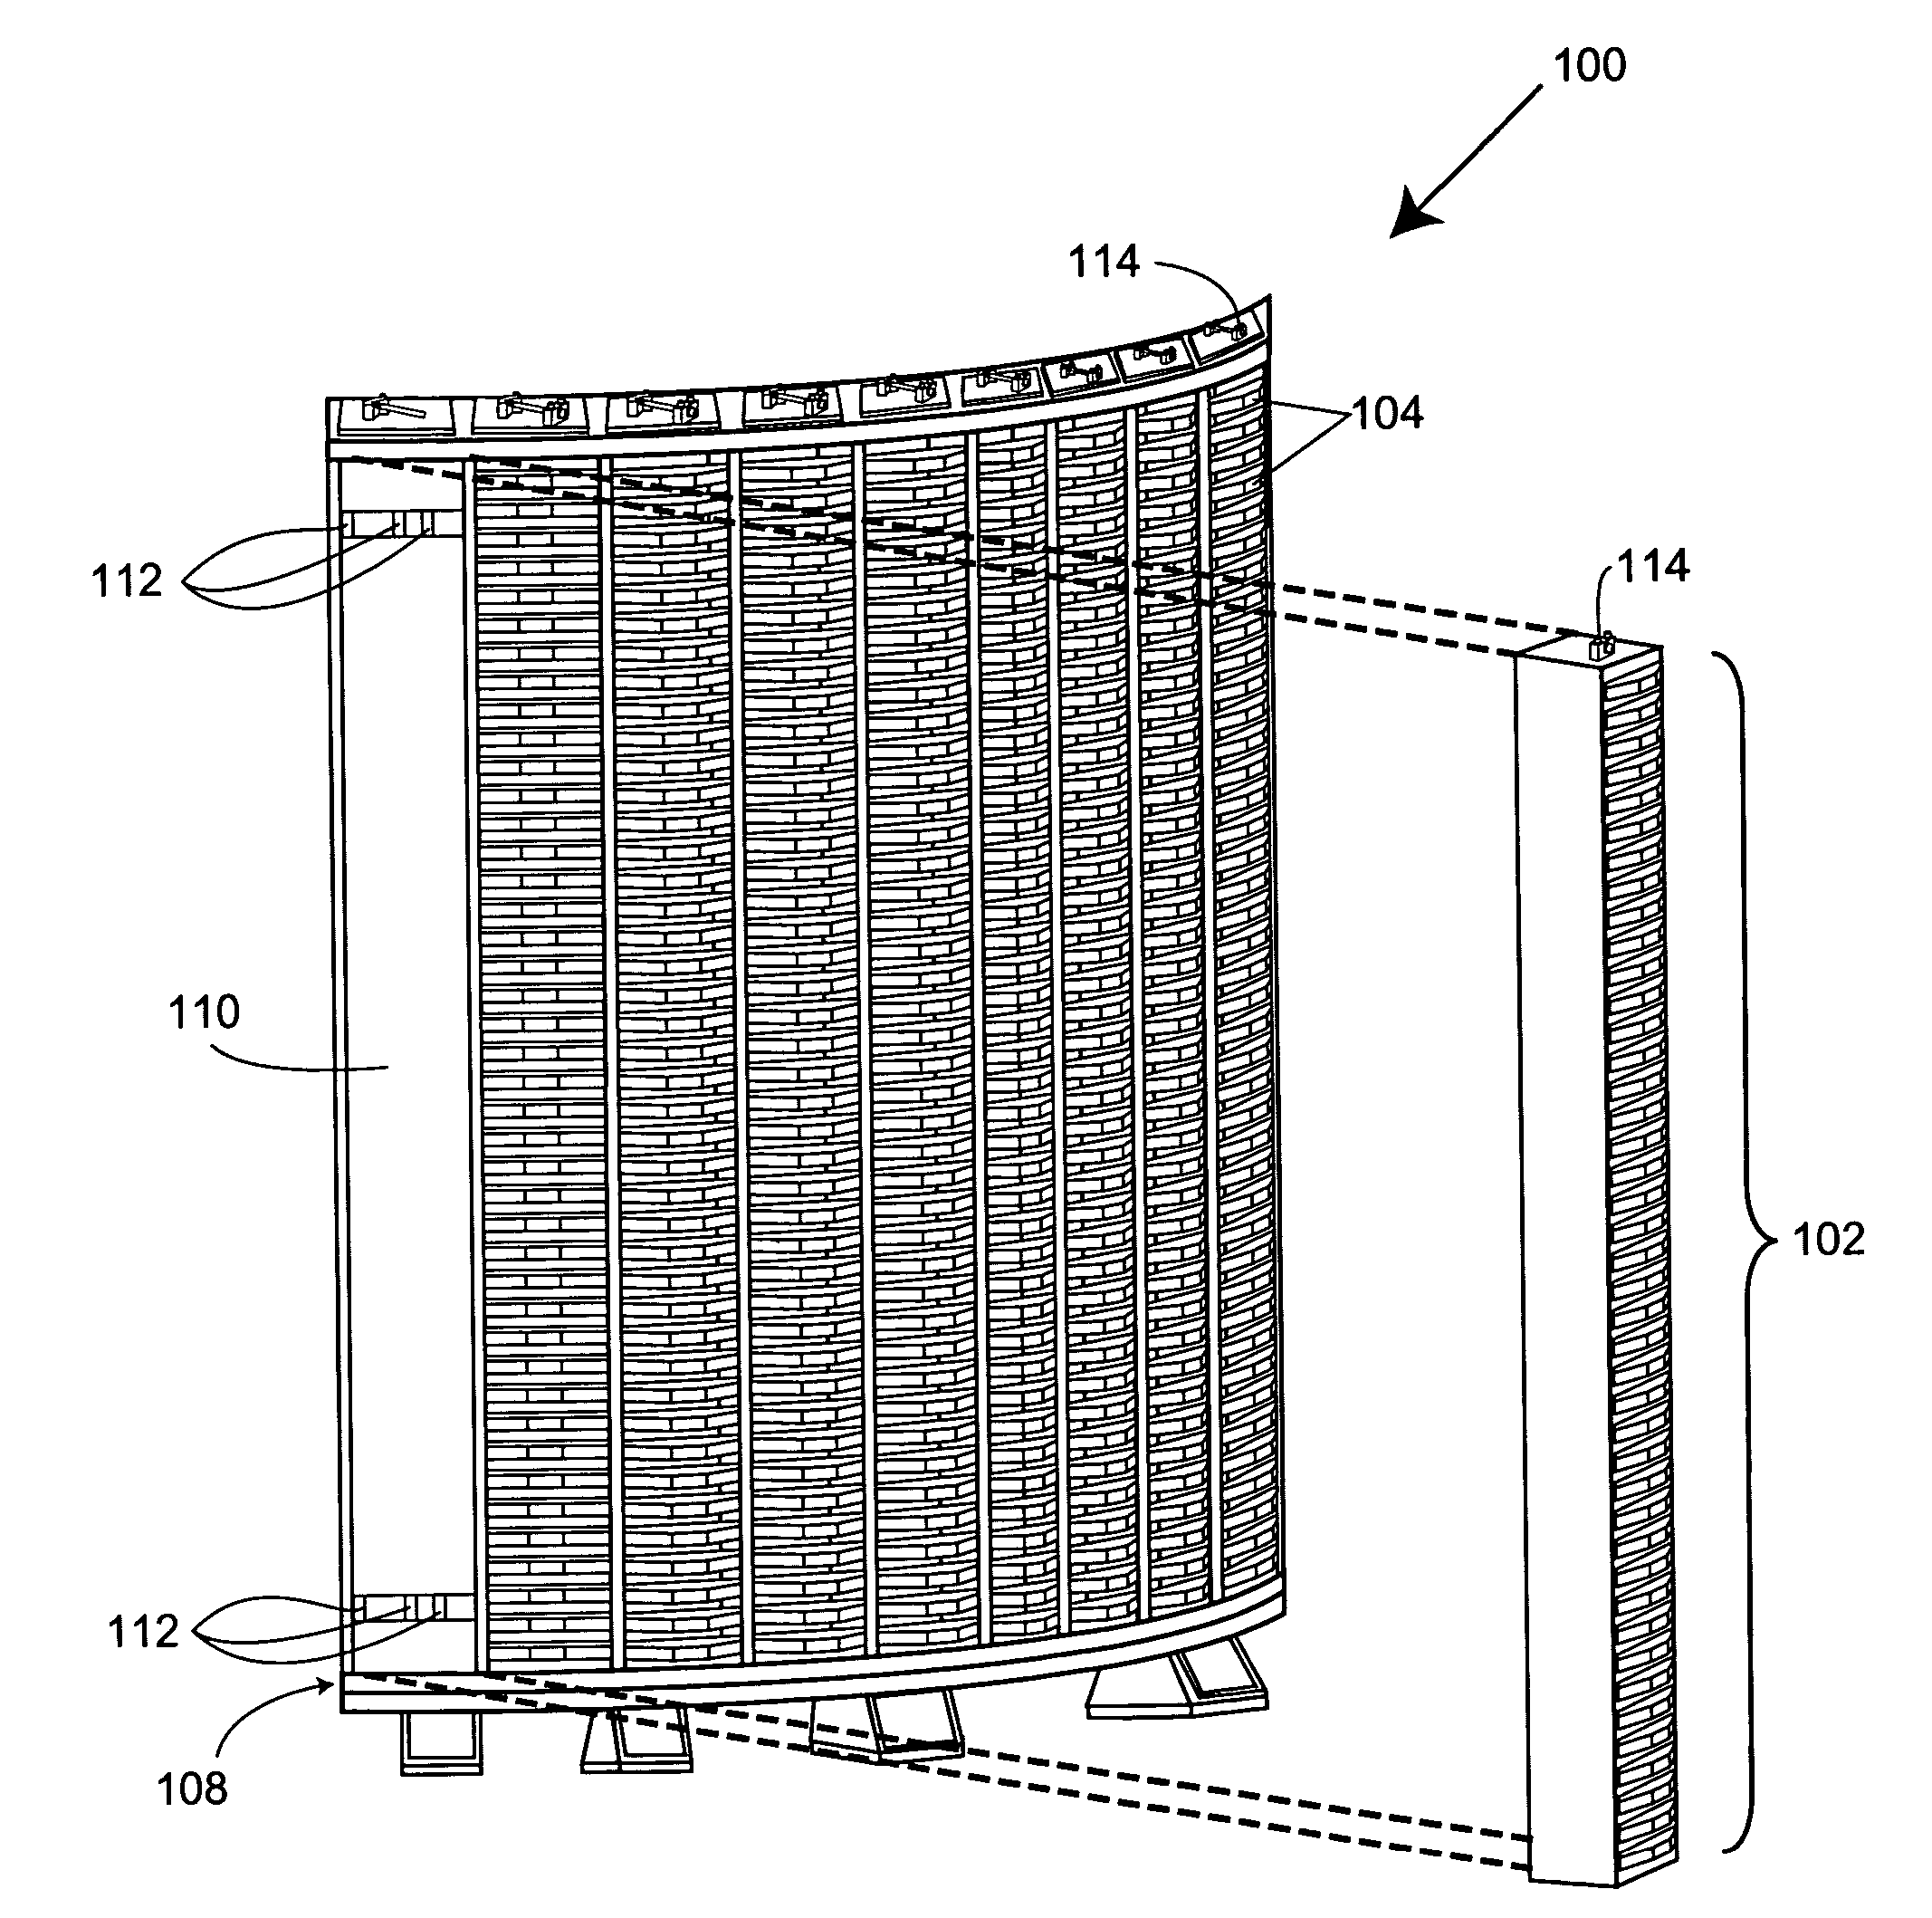 Object storage devices, systems, and related methods